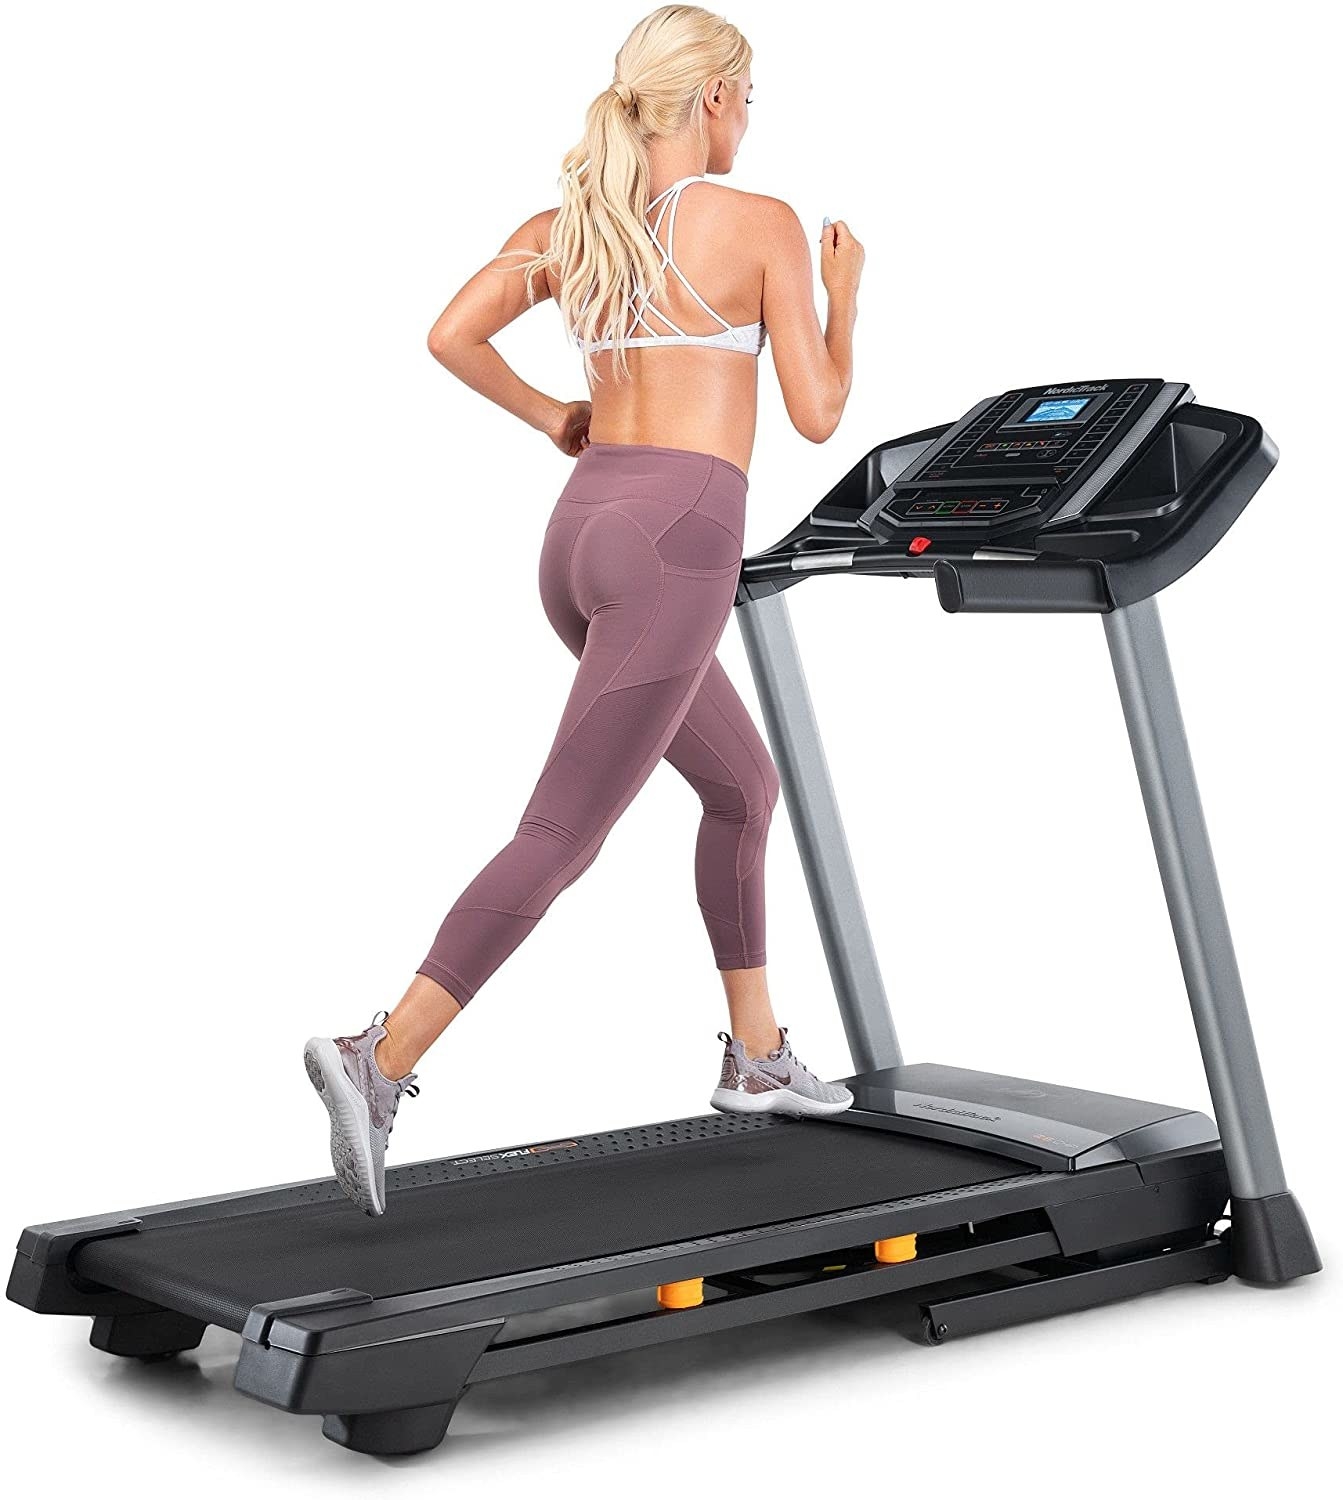 Model on a black treadmill with a screen display